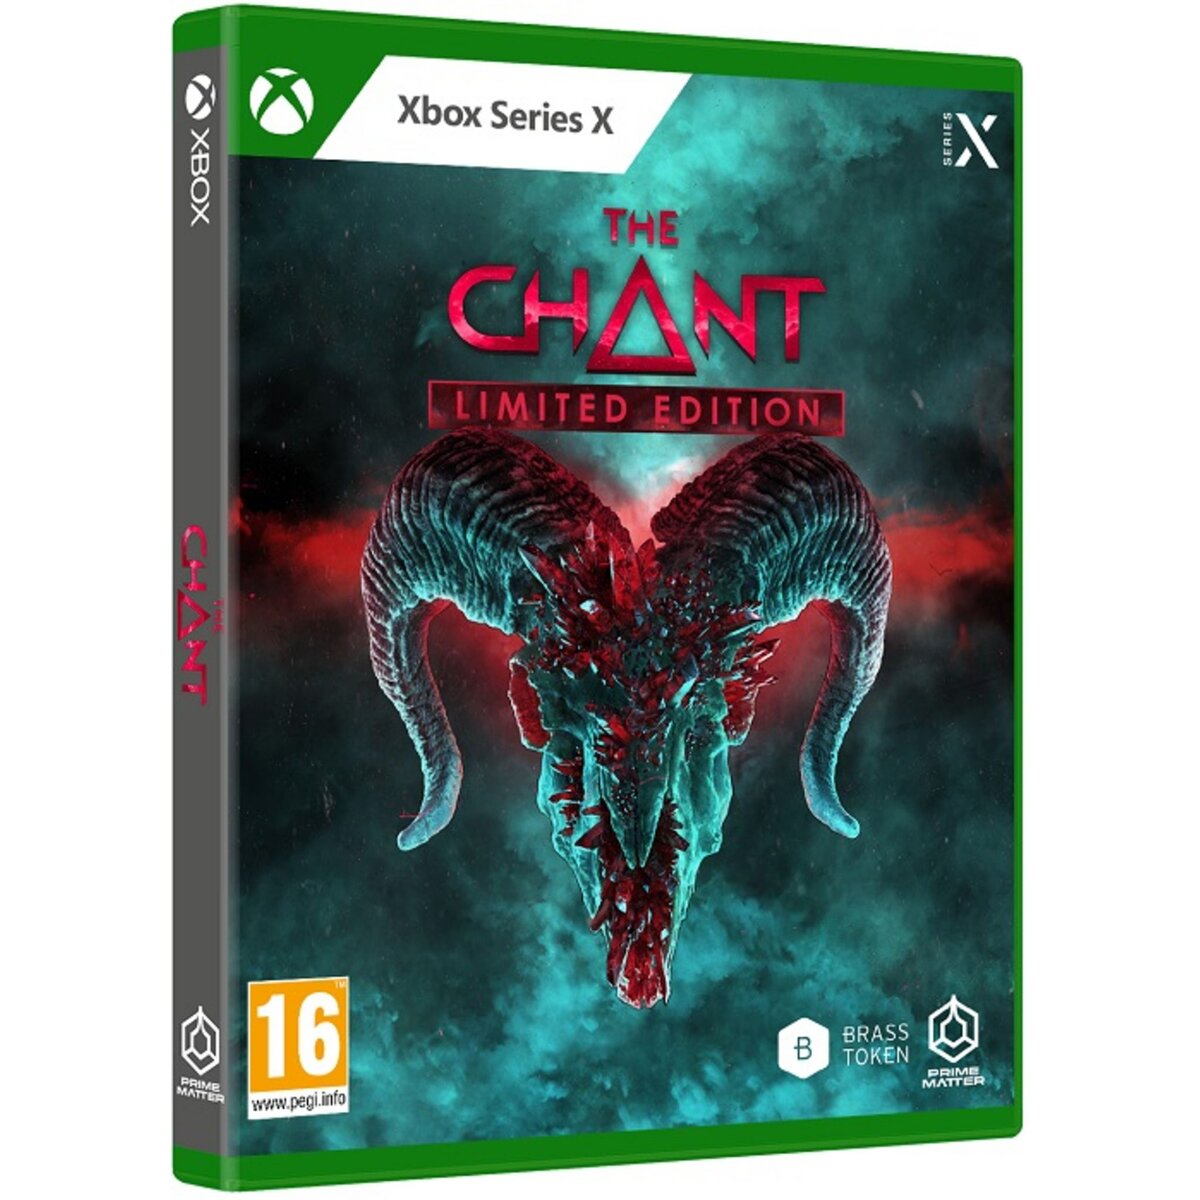 The Chant - Limited Edition Xbox Series X - Xbox One